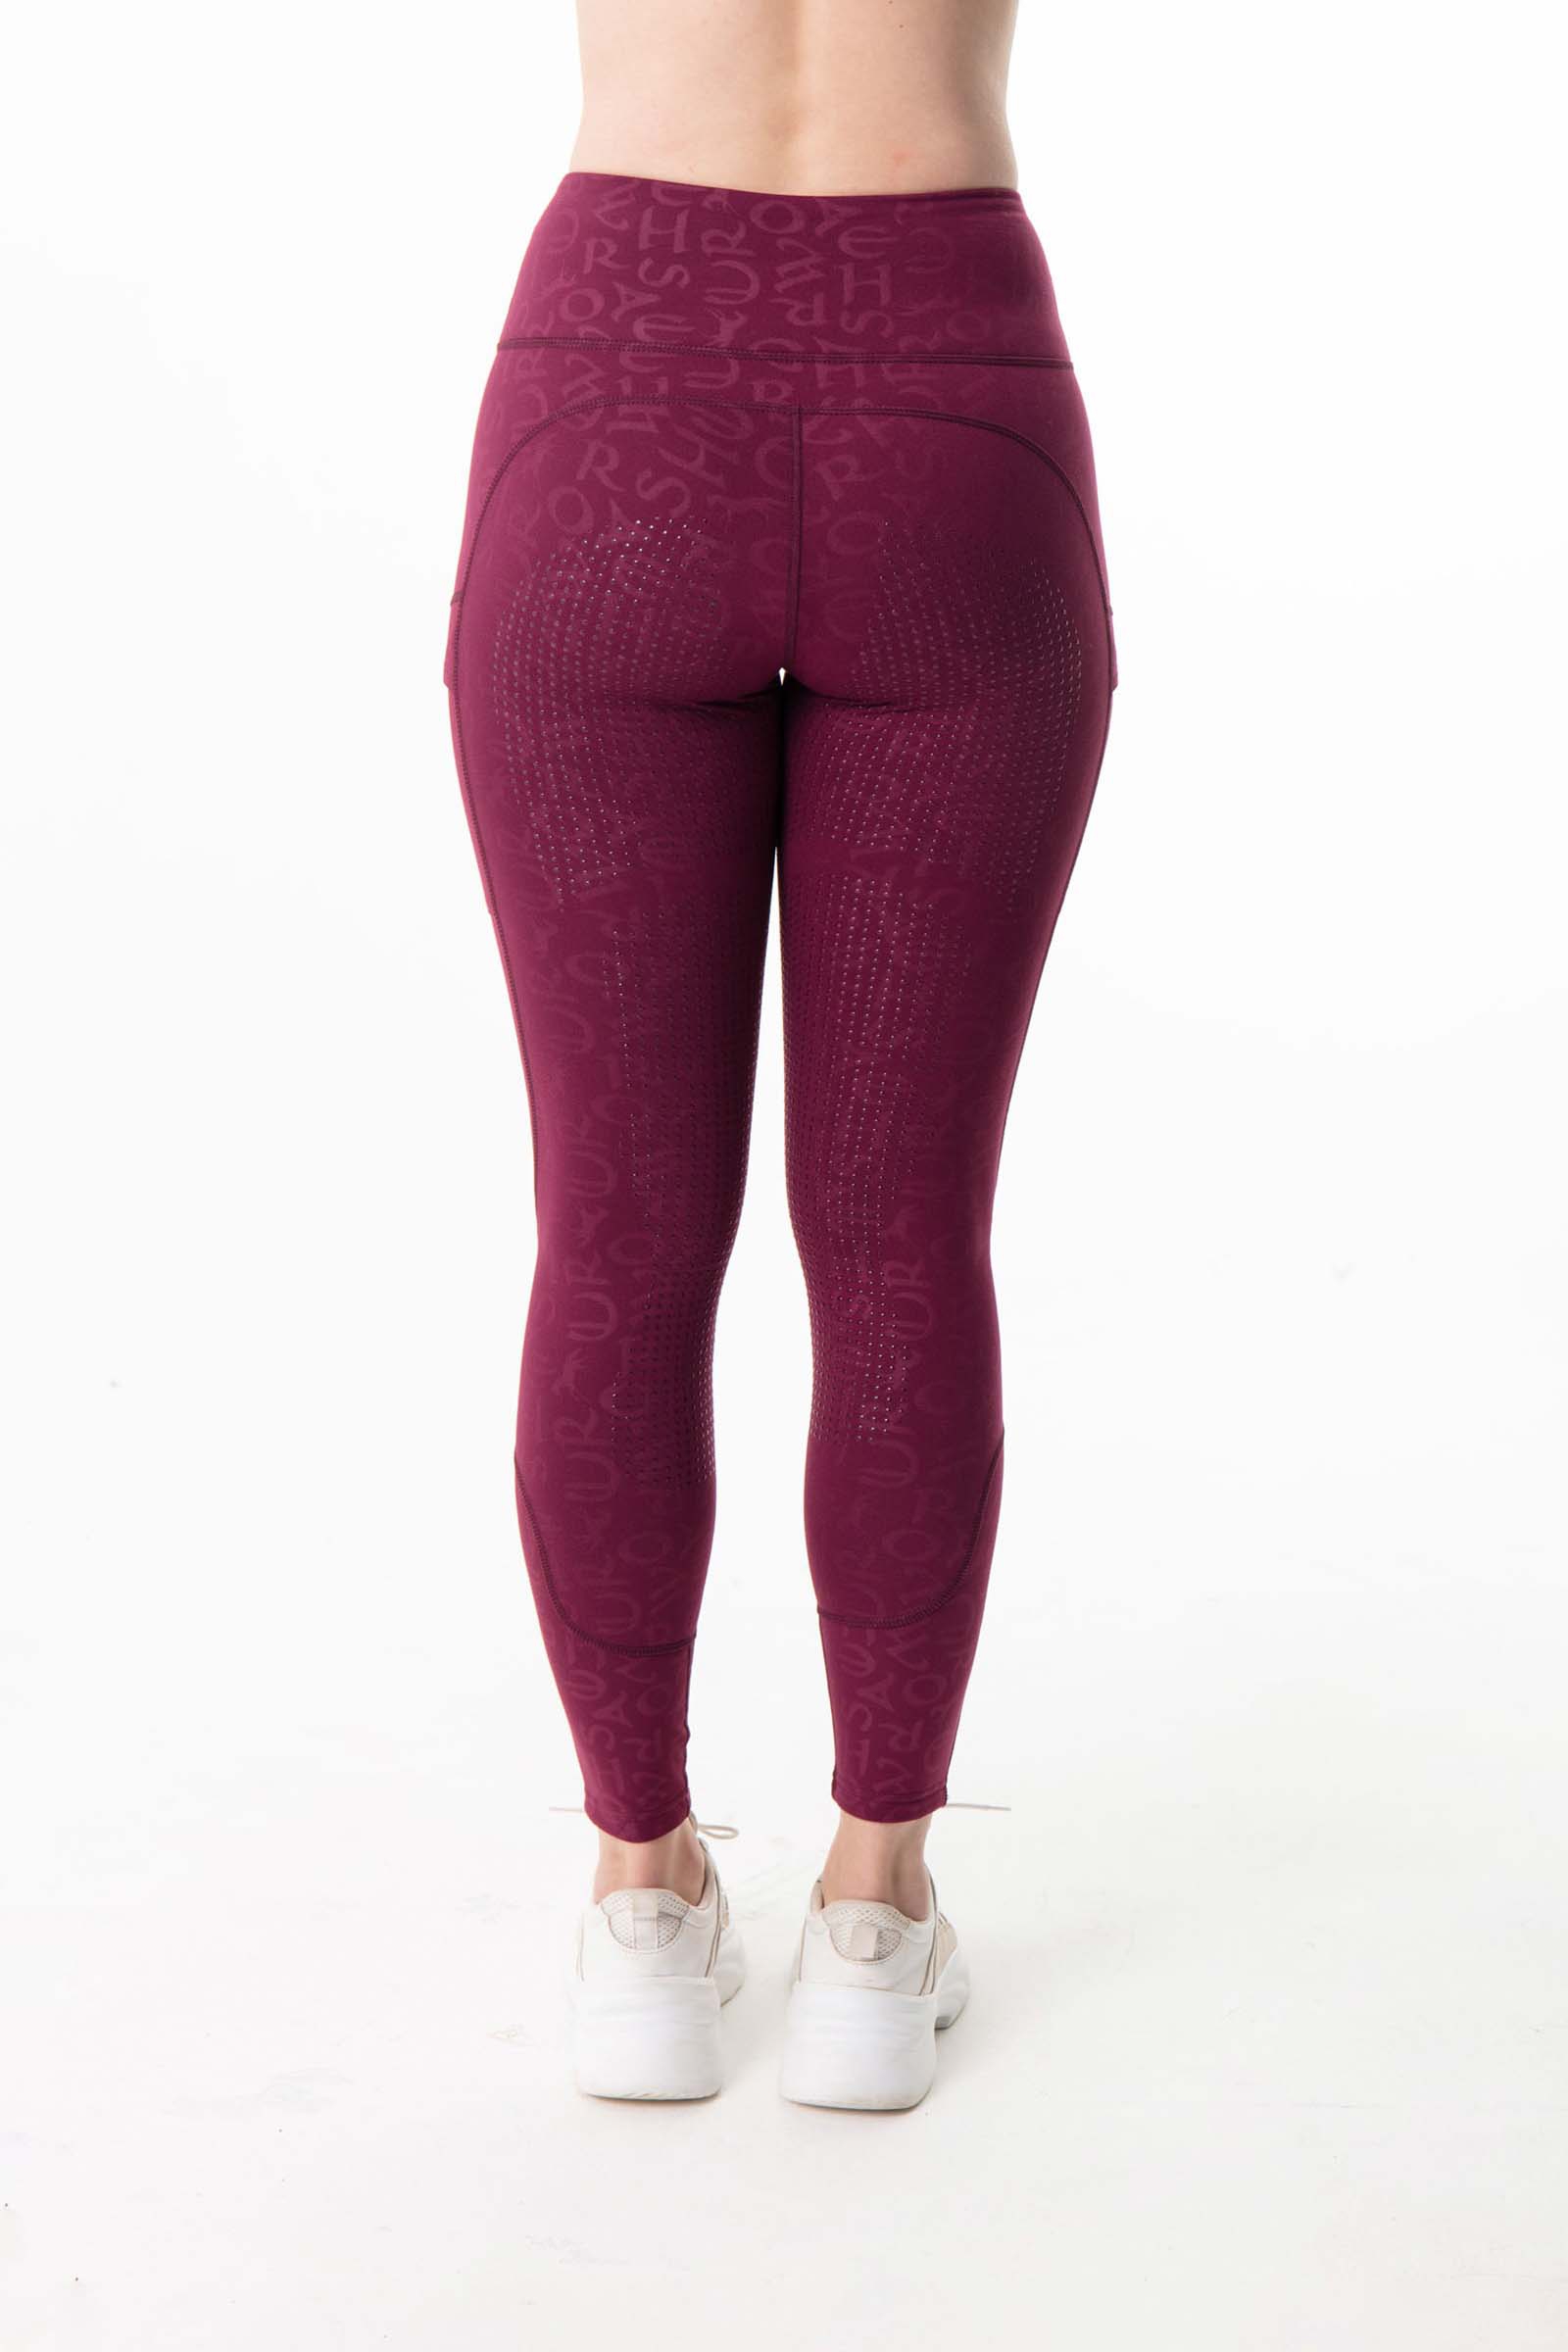 WINTER Thermal Riding Tights / Leggings pockets - COMPETITION